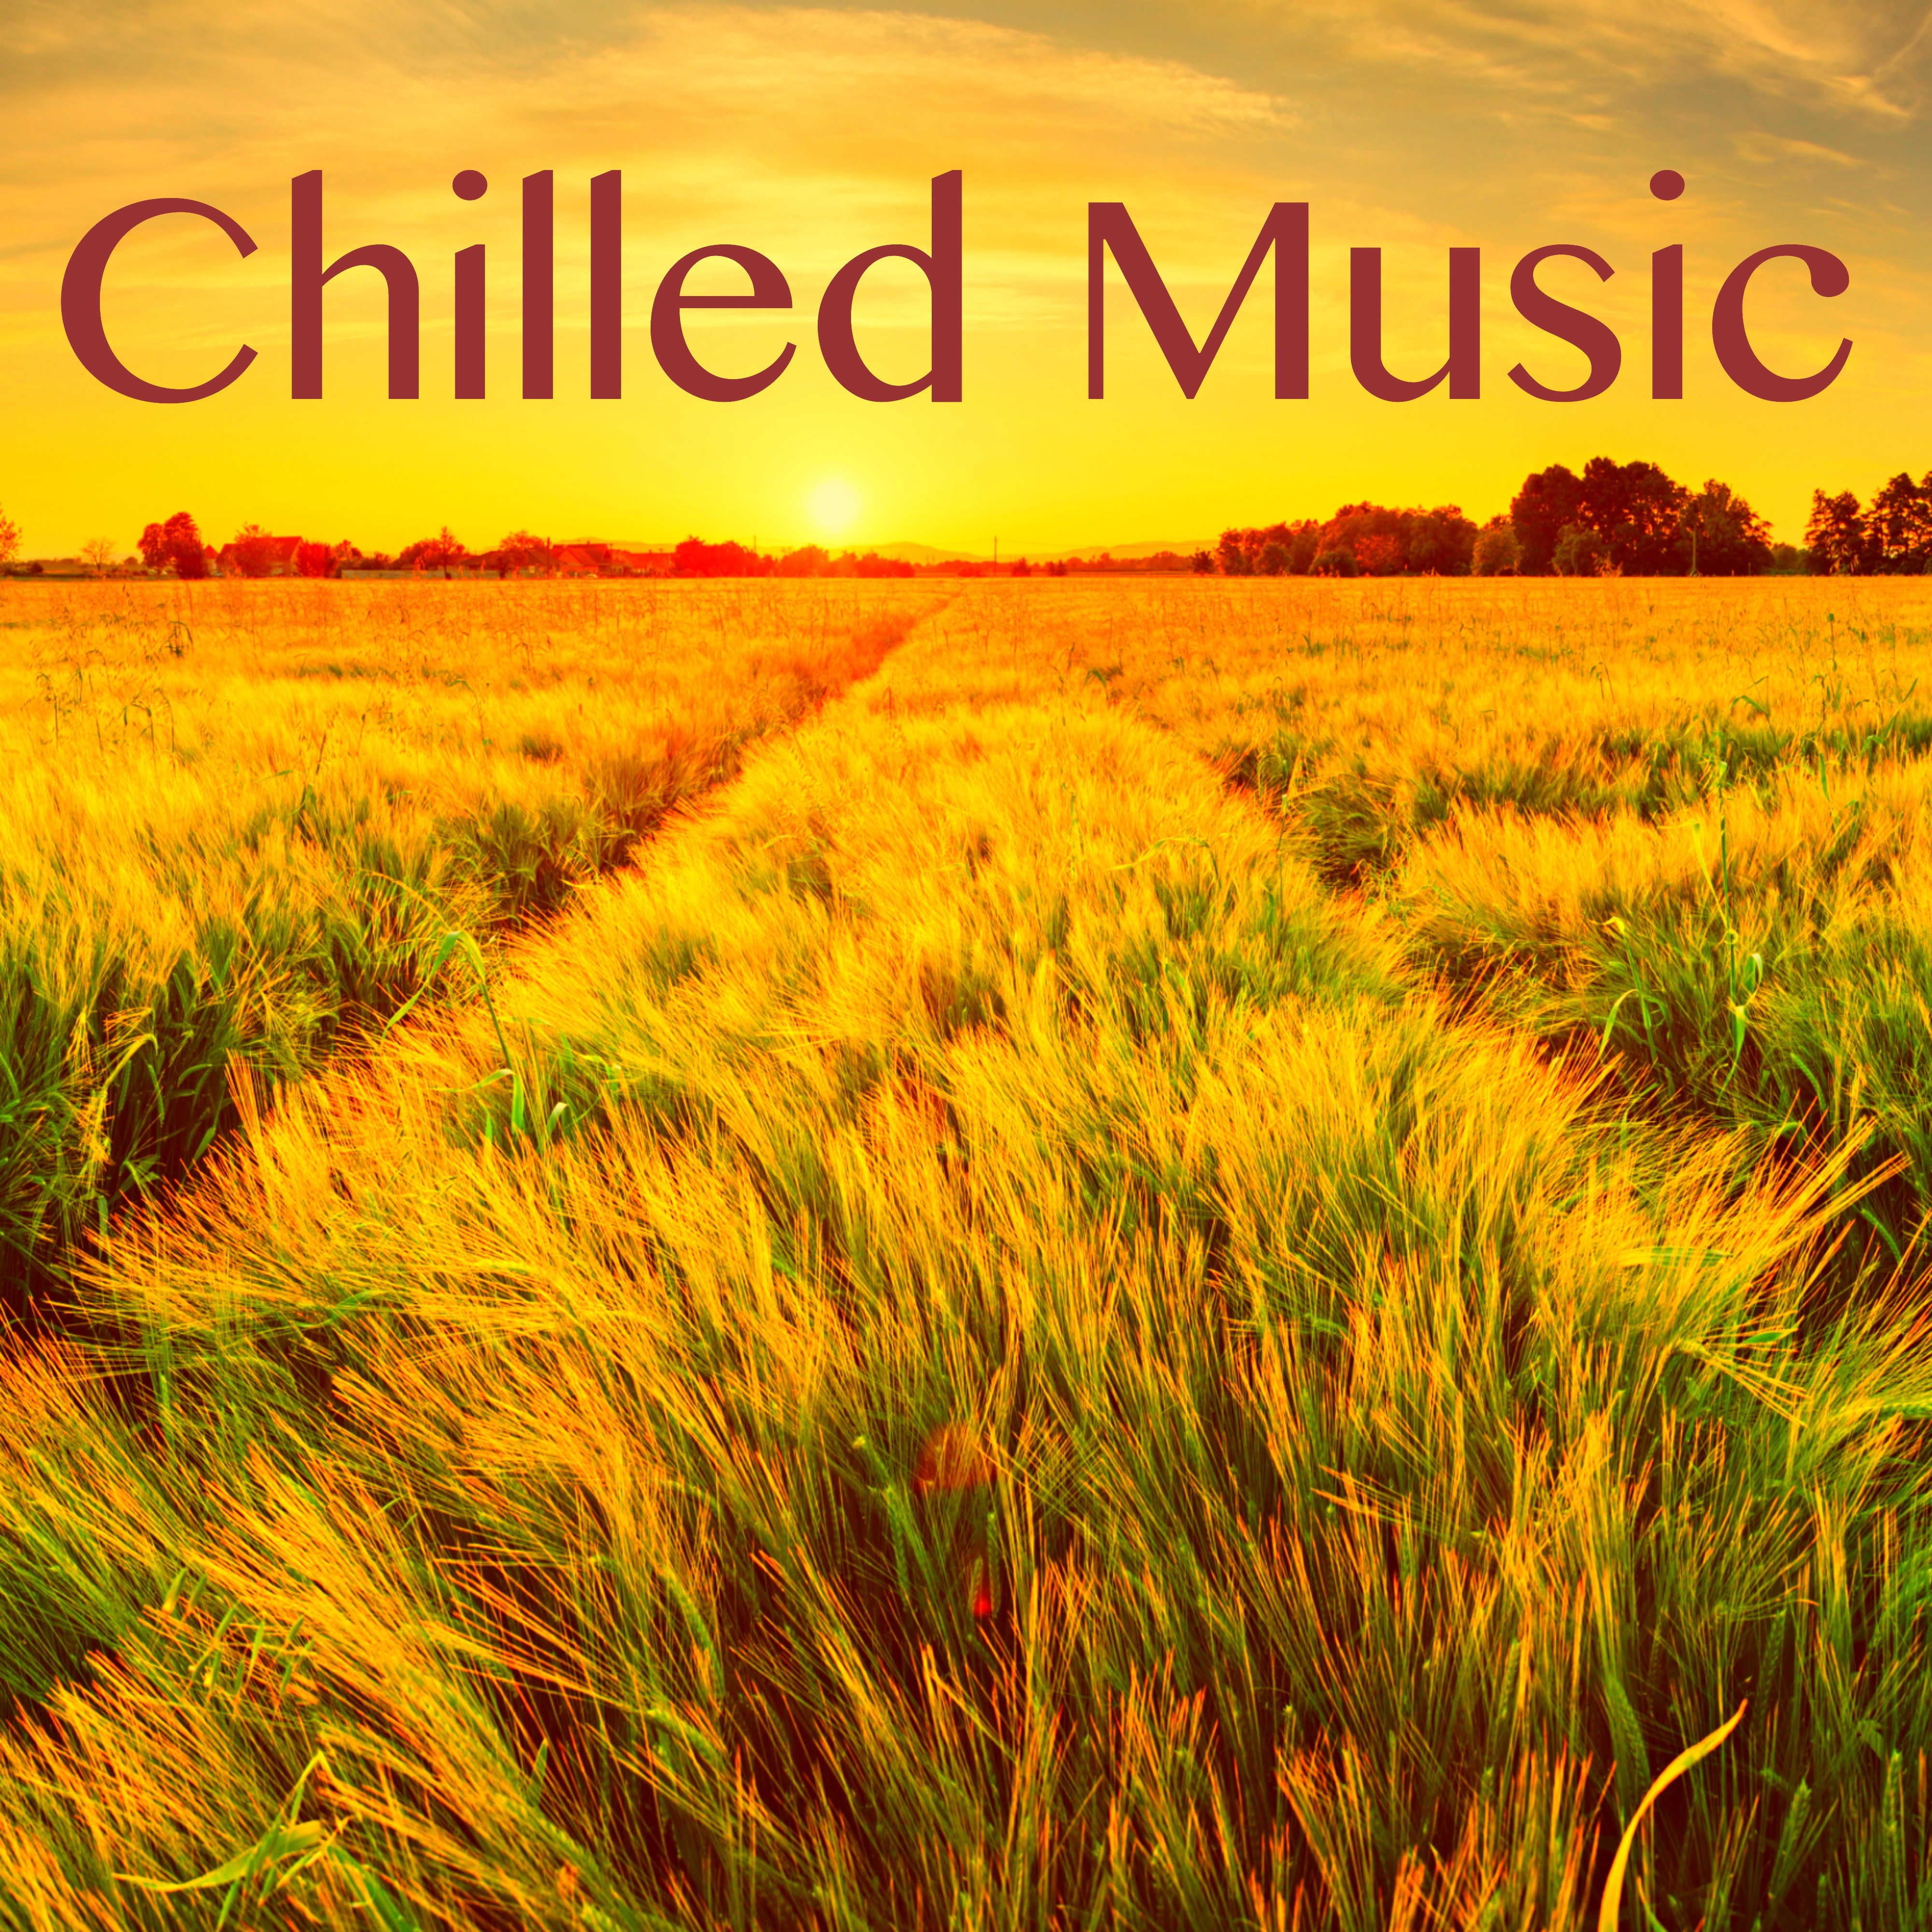 Chilled Music - Chilled Music Lounge Relaxation & Chillax